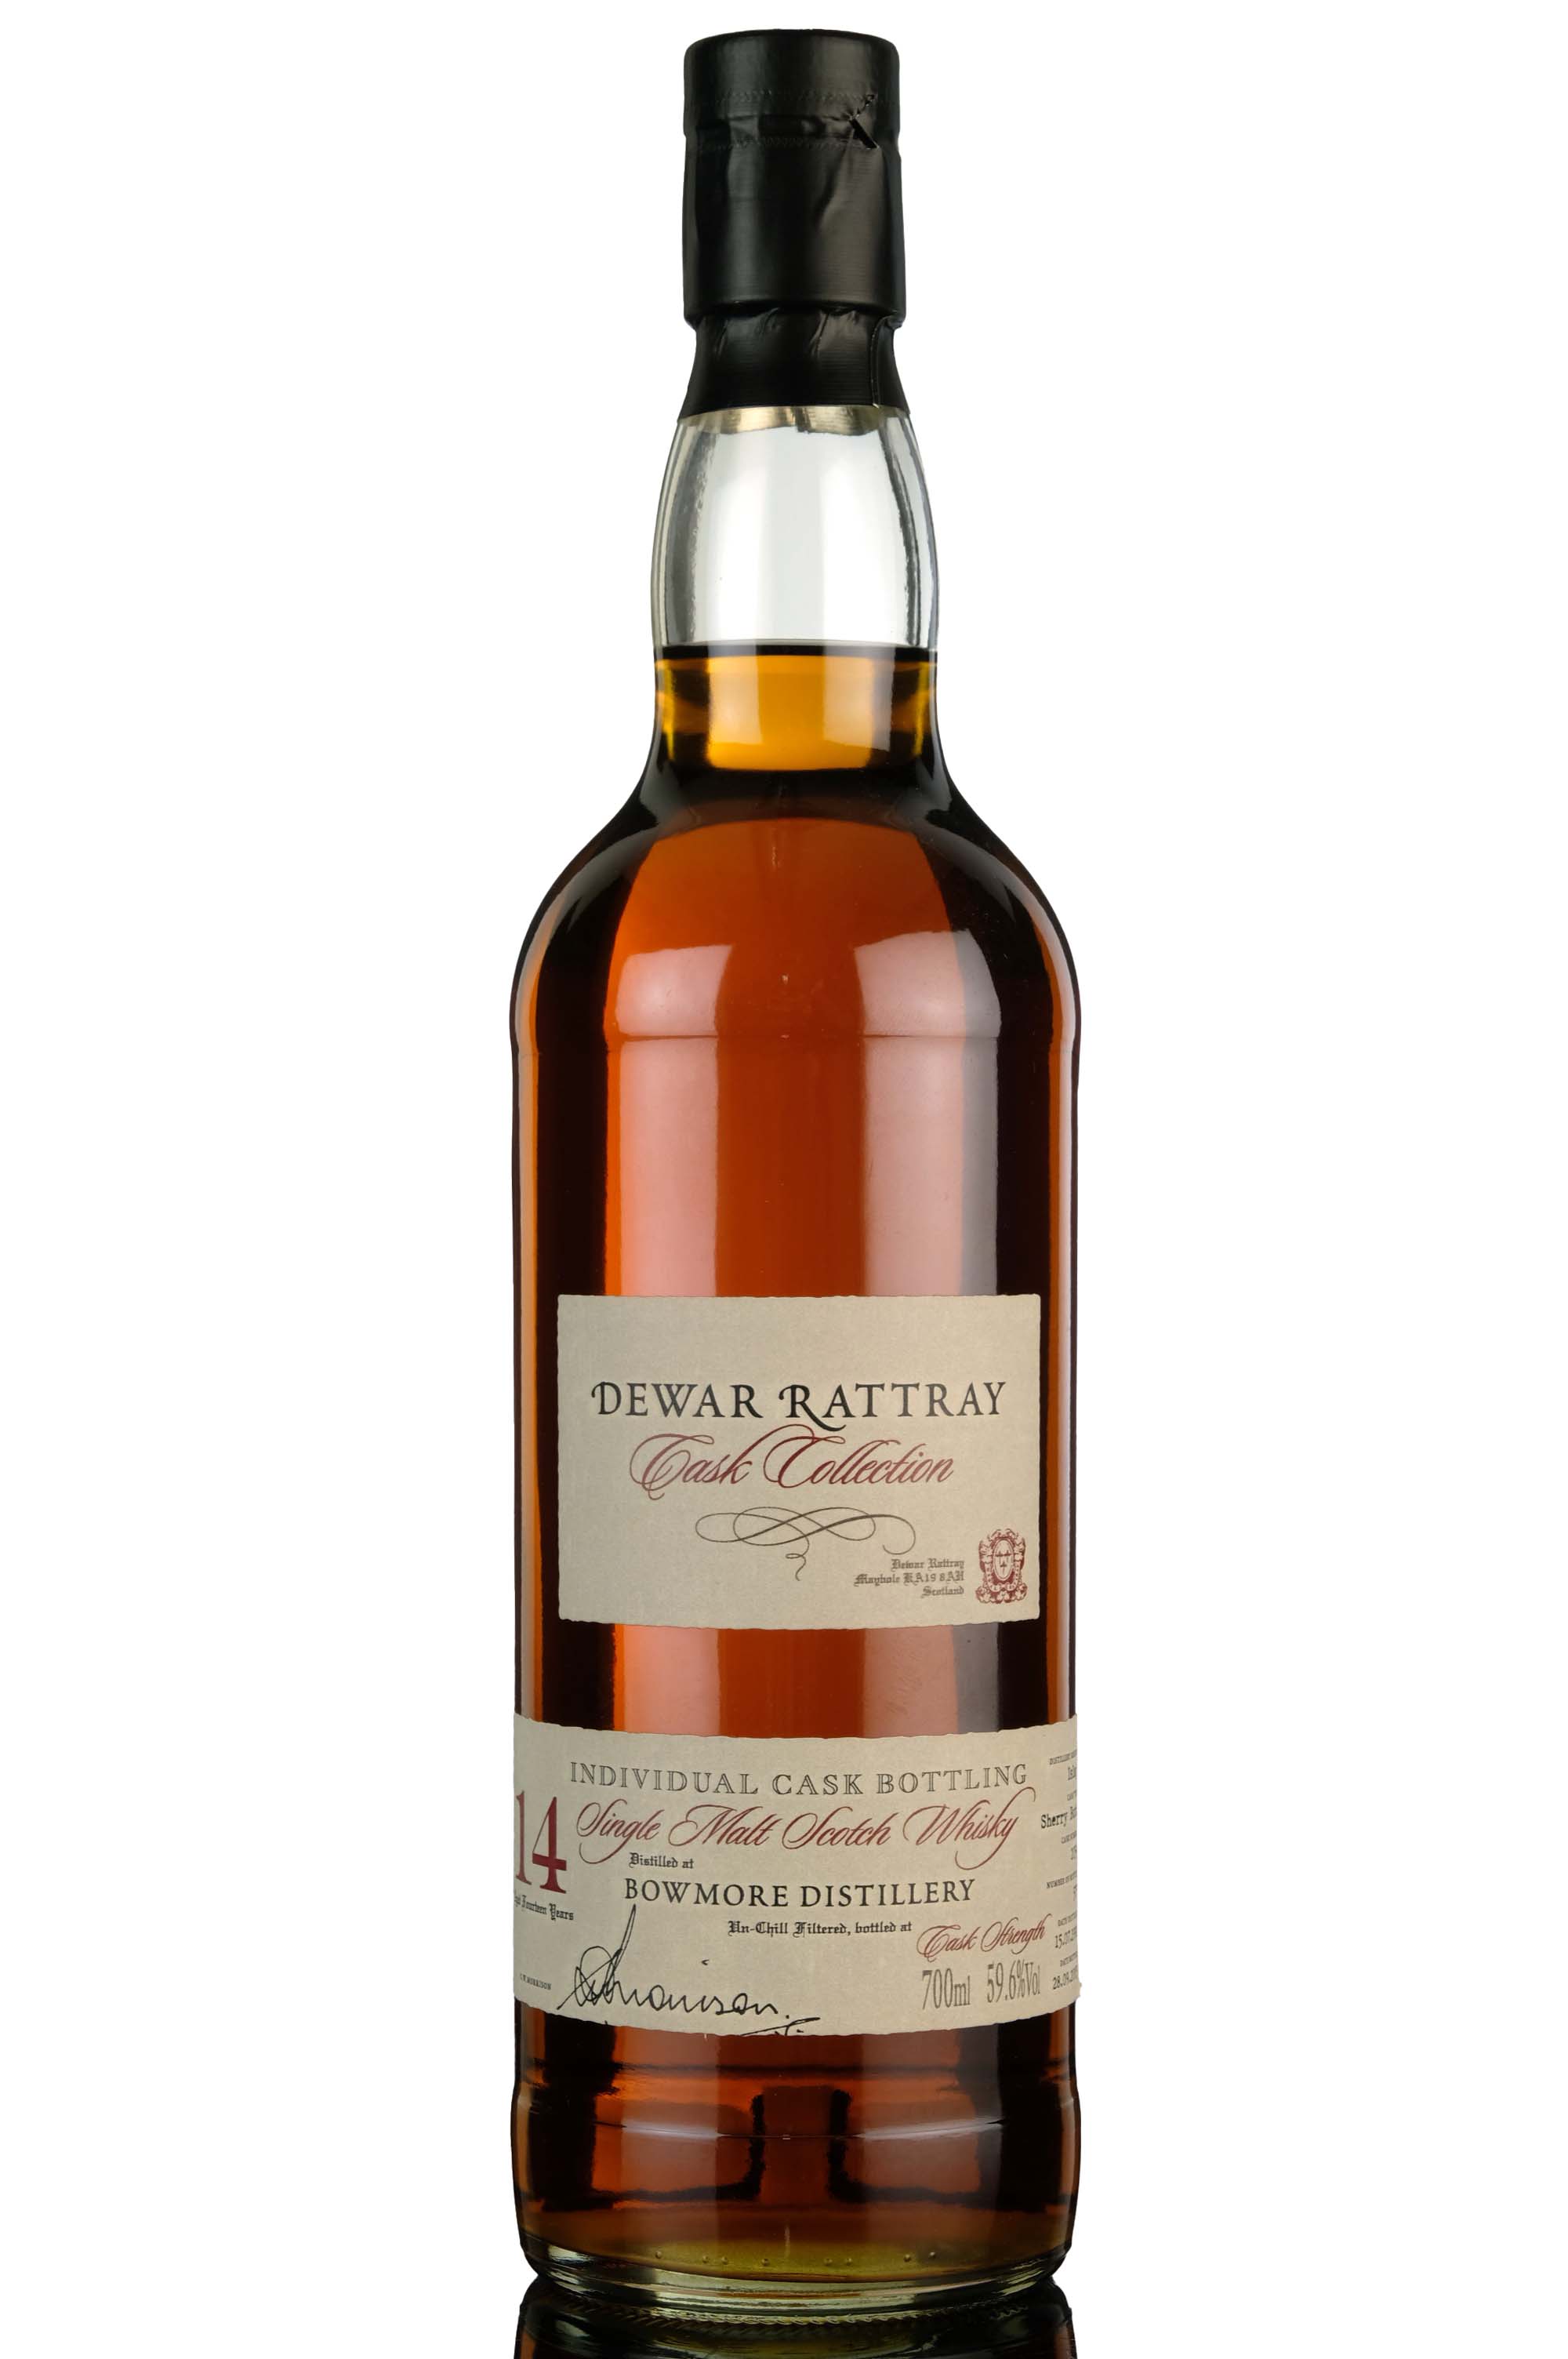 Bowmore 1991-2005 - 14 Year Old - Dewar Rattray - Cask Collection - Single Cask 2054